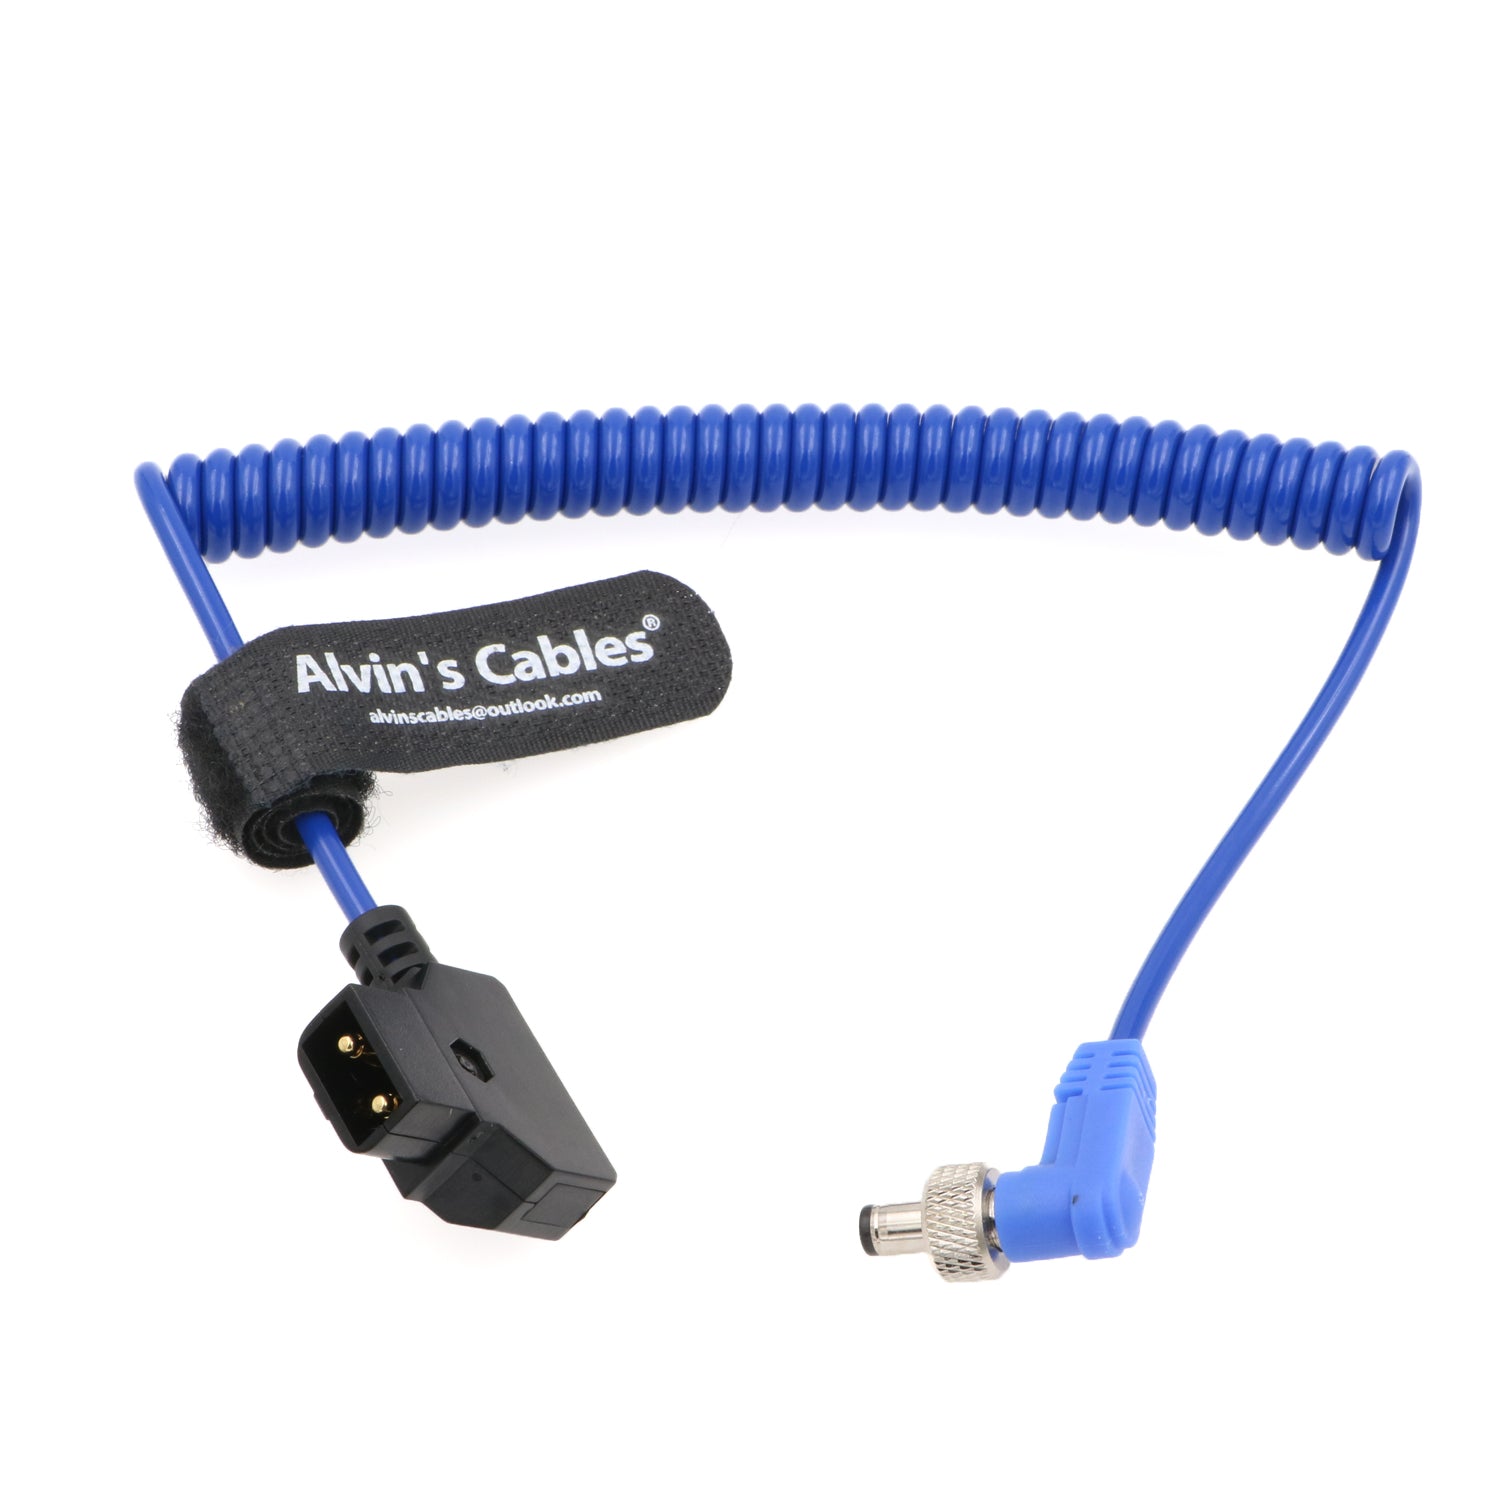 Alvin's Cables Locking DC 5.5 2.1 to D Tap Coiled Power Cable for Video Devices PIX-E7 PIX-E5 7 Touchscreen Display Blue CableHollyland Mars 400s